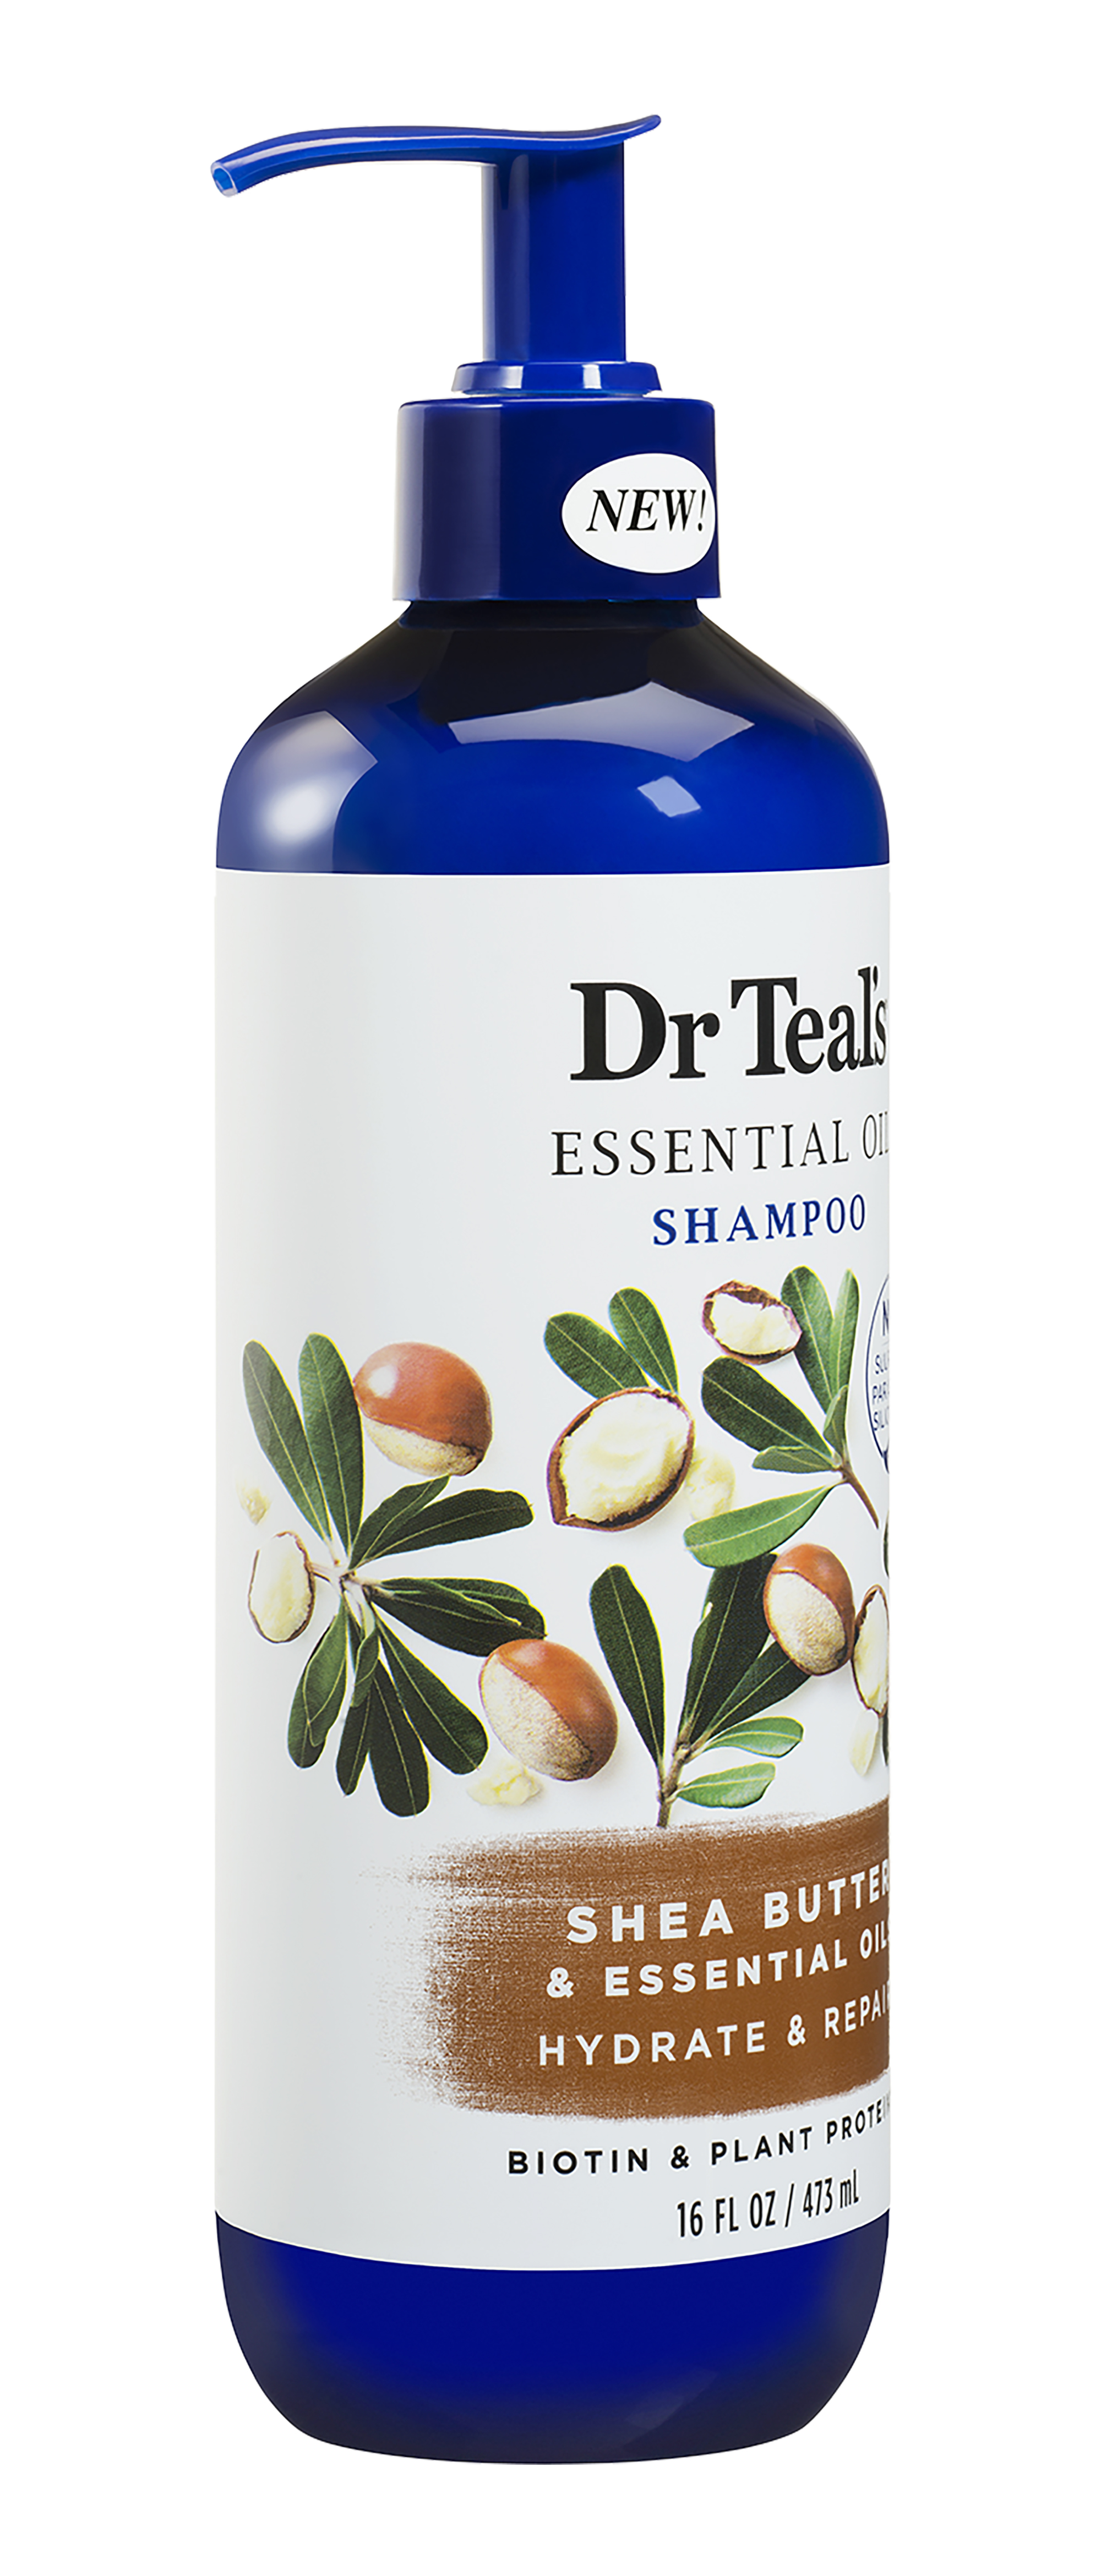 Dr Teal's Shea Butter Hydrate & Repair Essential Oil Shampoo, Sulfate Free, 16 oz. - image 2 of 7